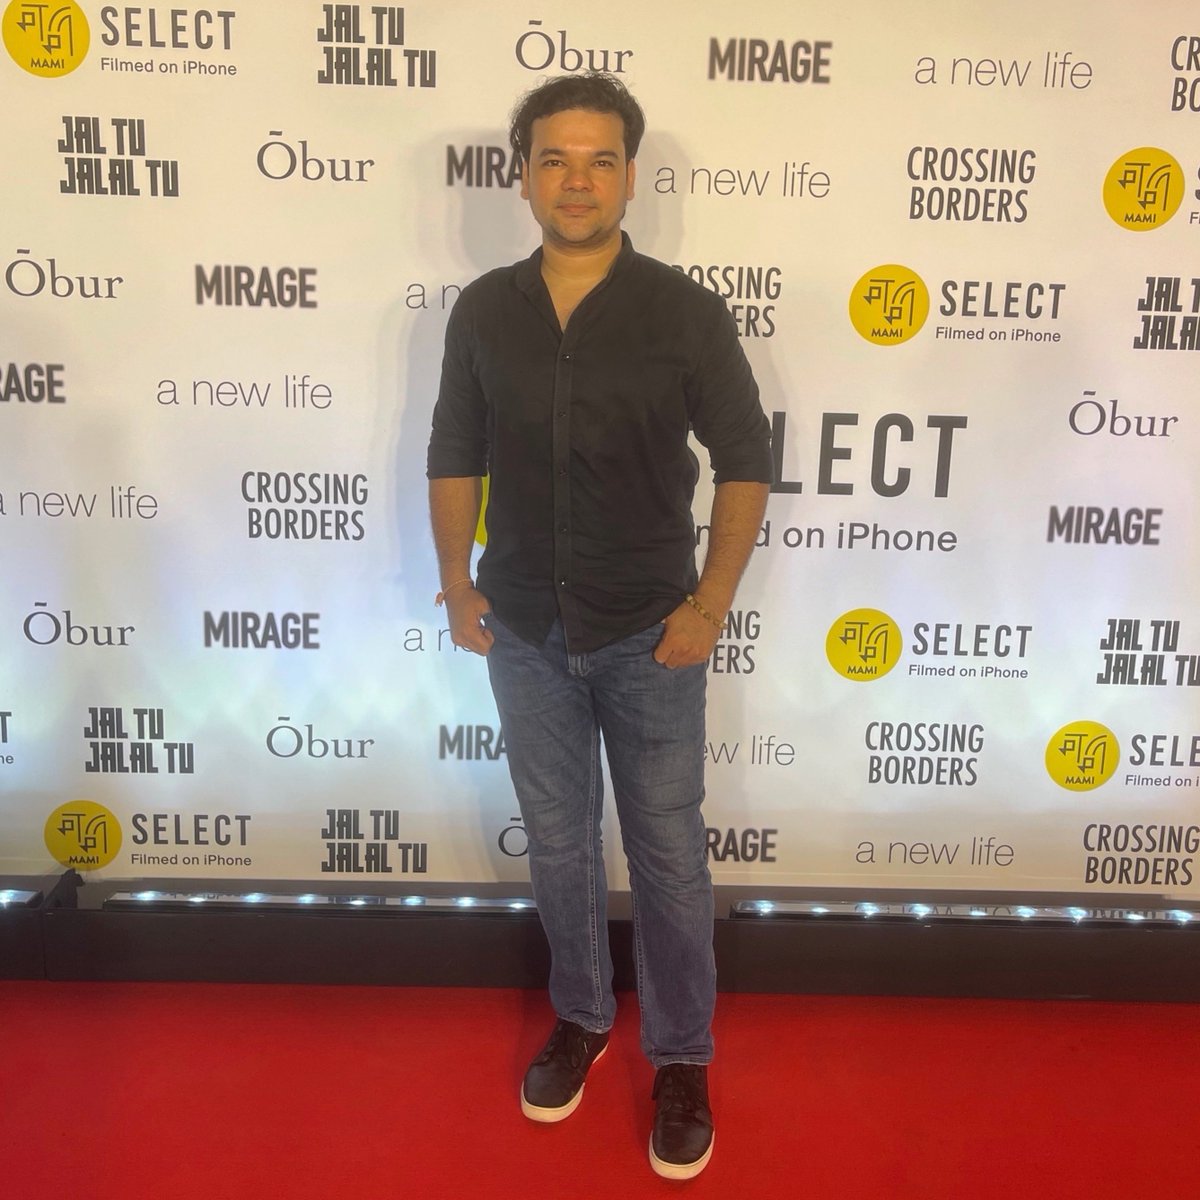 RED CARPET: Exclusive screening of MAMI Select: Filmed on iPhone, a new initiative by MAMI wherein 5 next gen filmmakers were given the platform to reimagine traditional cinematic conventions. 
#obur #mirage #jaltujalaaltu #anewlife #crossingborders #mamiscreening #suyashpachauri